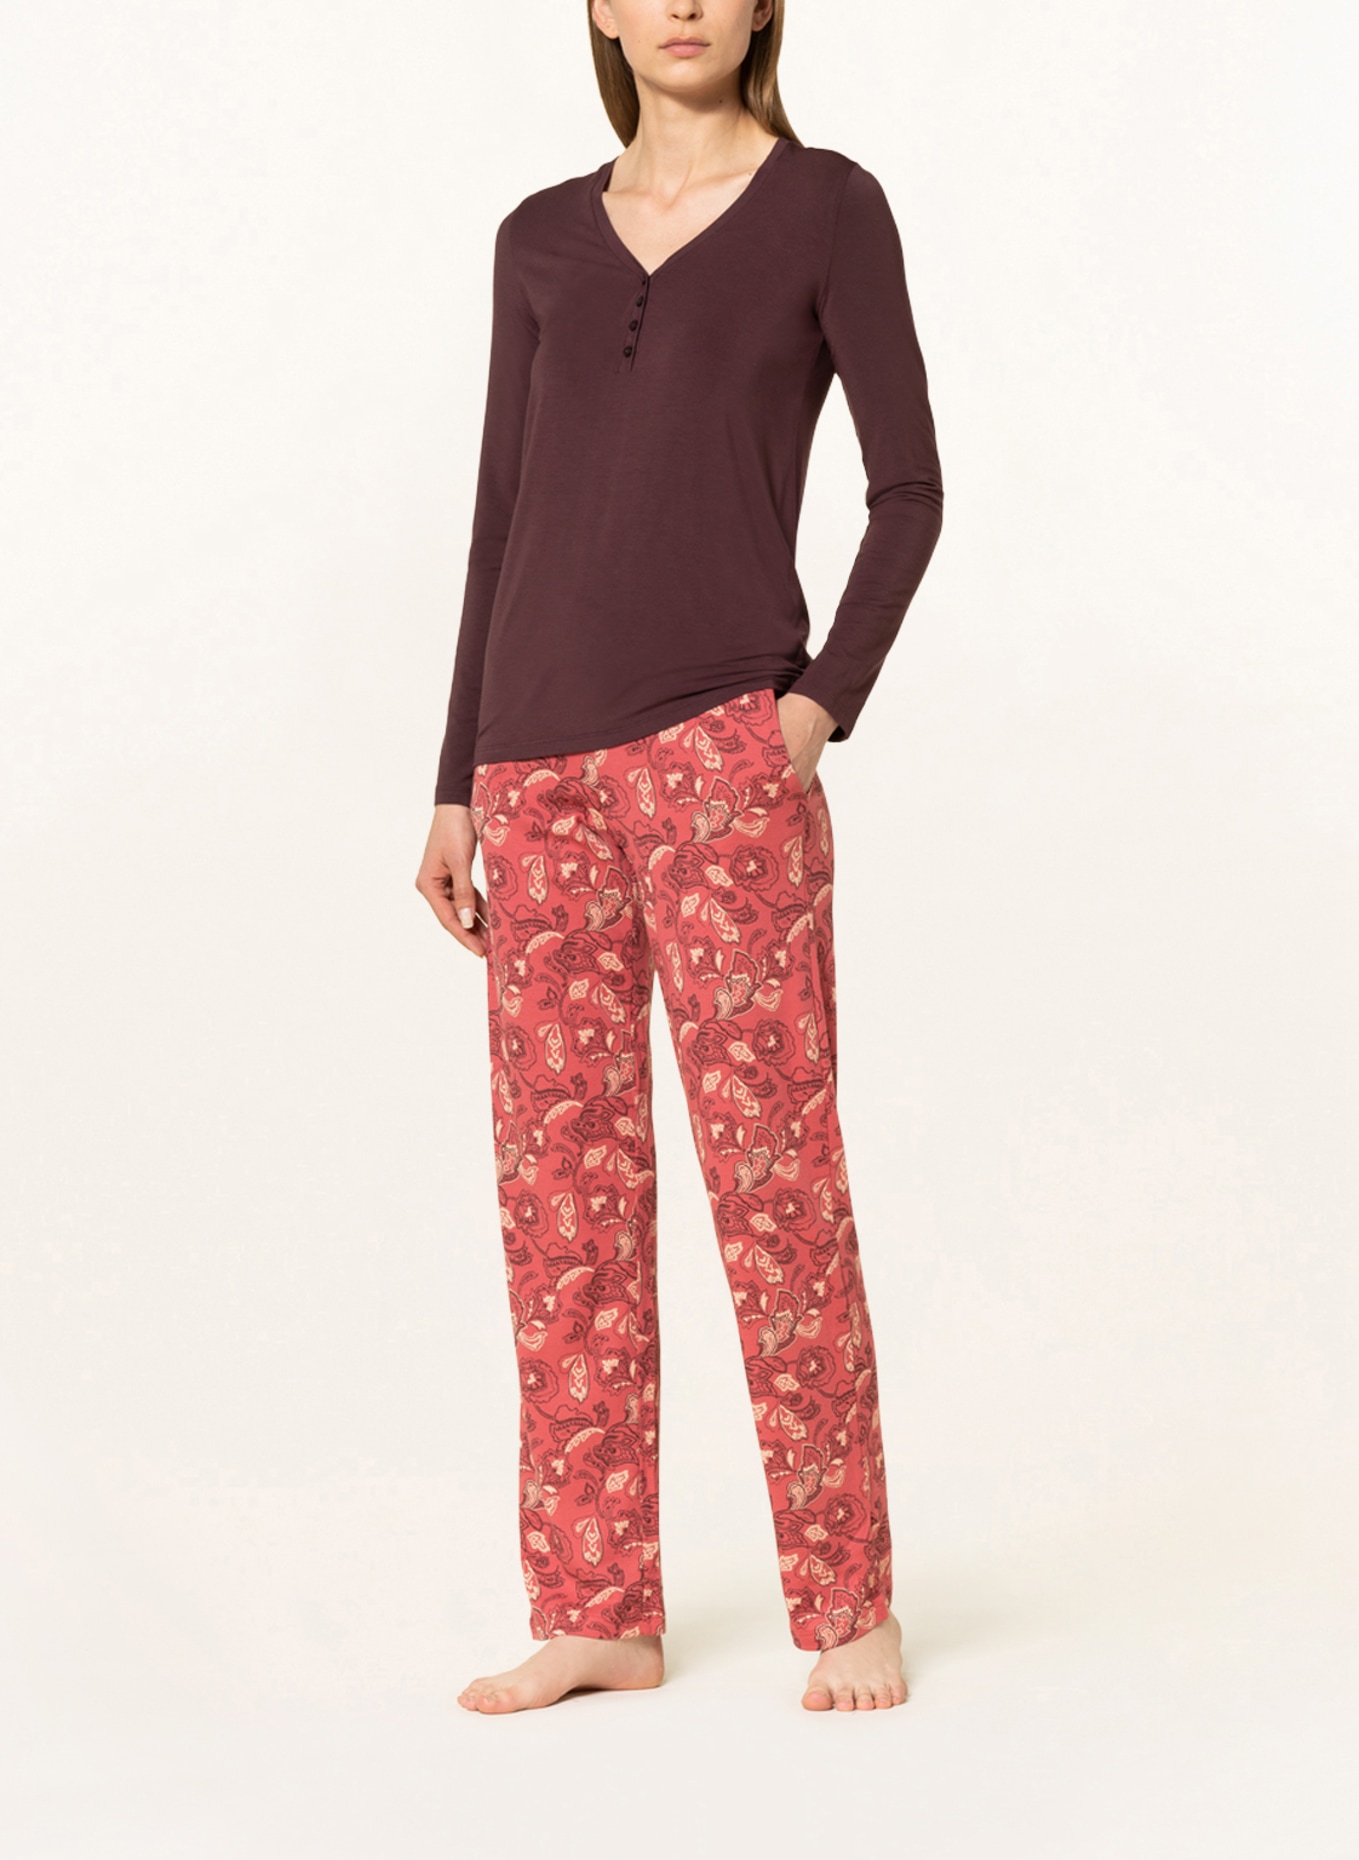 SCHIESSER Pajama pants MIX+RELAX, Color: LIGHT RED/ LIGHT YELLOW/ DARK BROWN (Image 2)